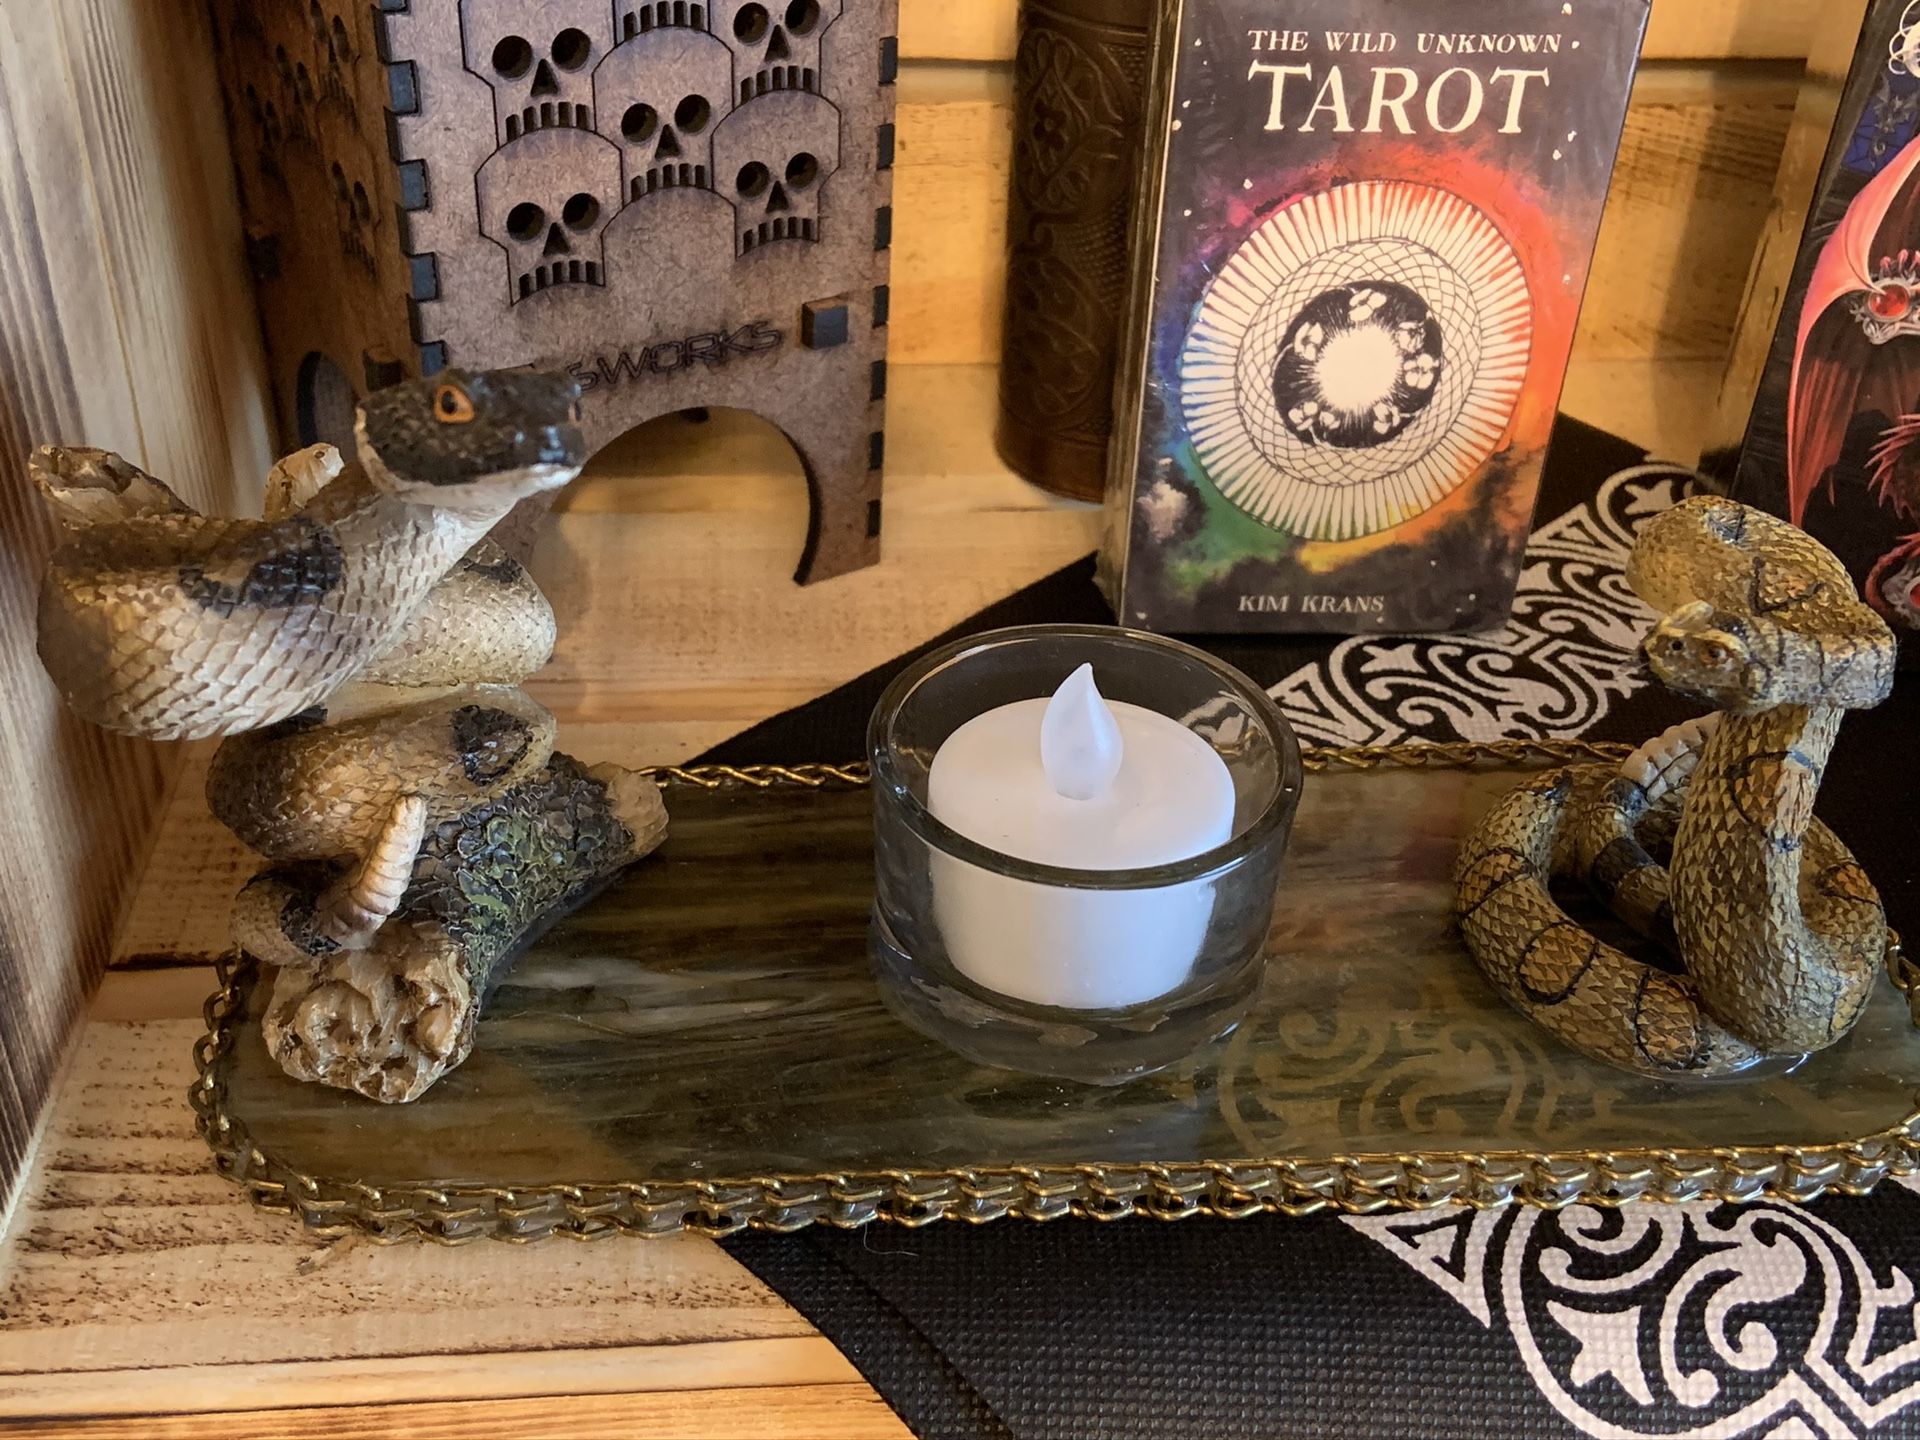 Tea light candle holder w/rattle snakes